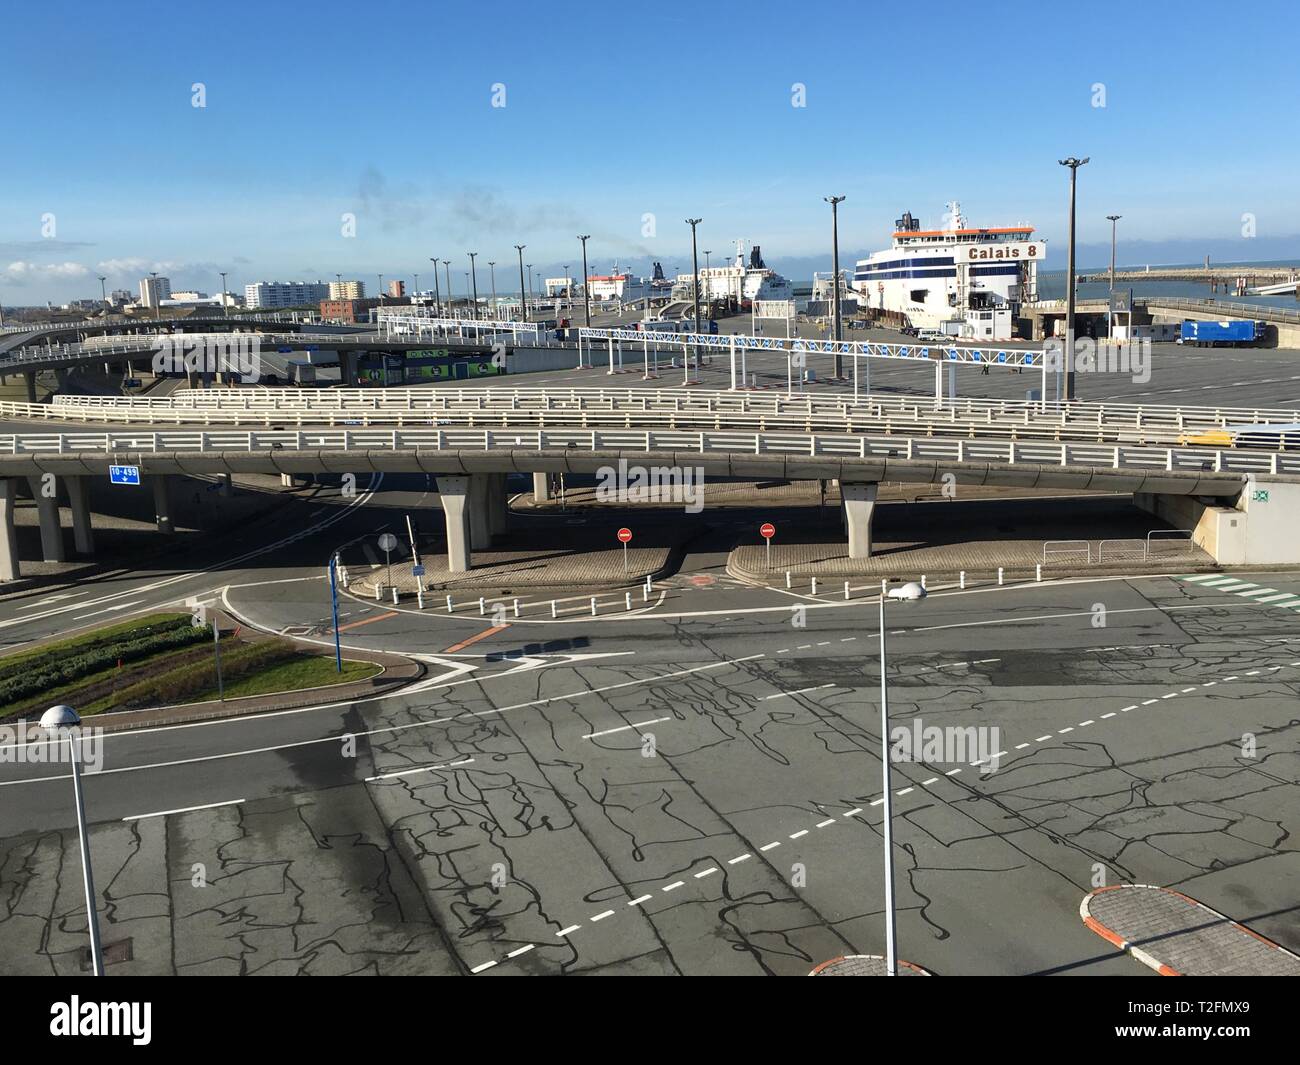 11 February 2019, France (France), Calais: The port of Calais. At no other place is Great Britain so close to the European mainland. The French port city is the most important gateway to the United Kingdom. (to dpa 'Collapse on the coast? - European ports and the Brexit') Photo: Julia Naue/dpa Stock Photo